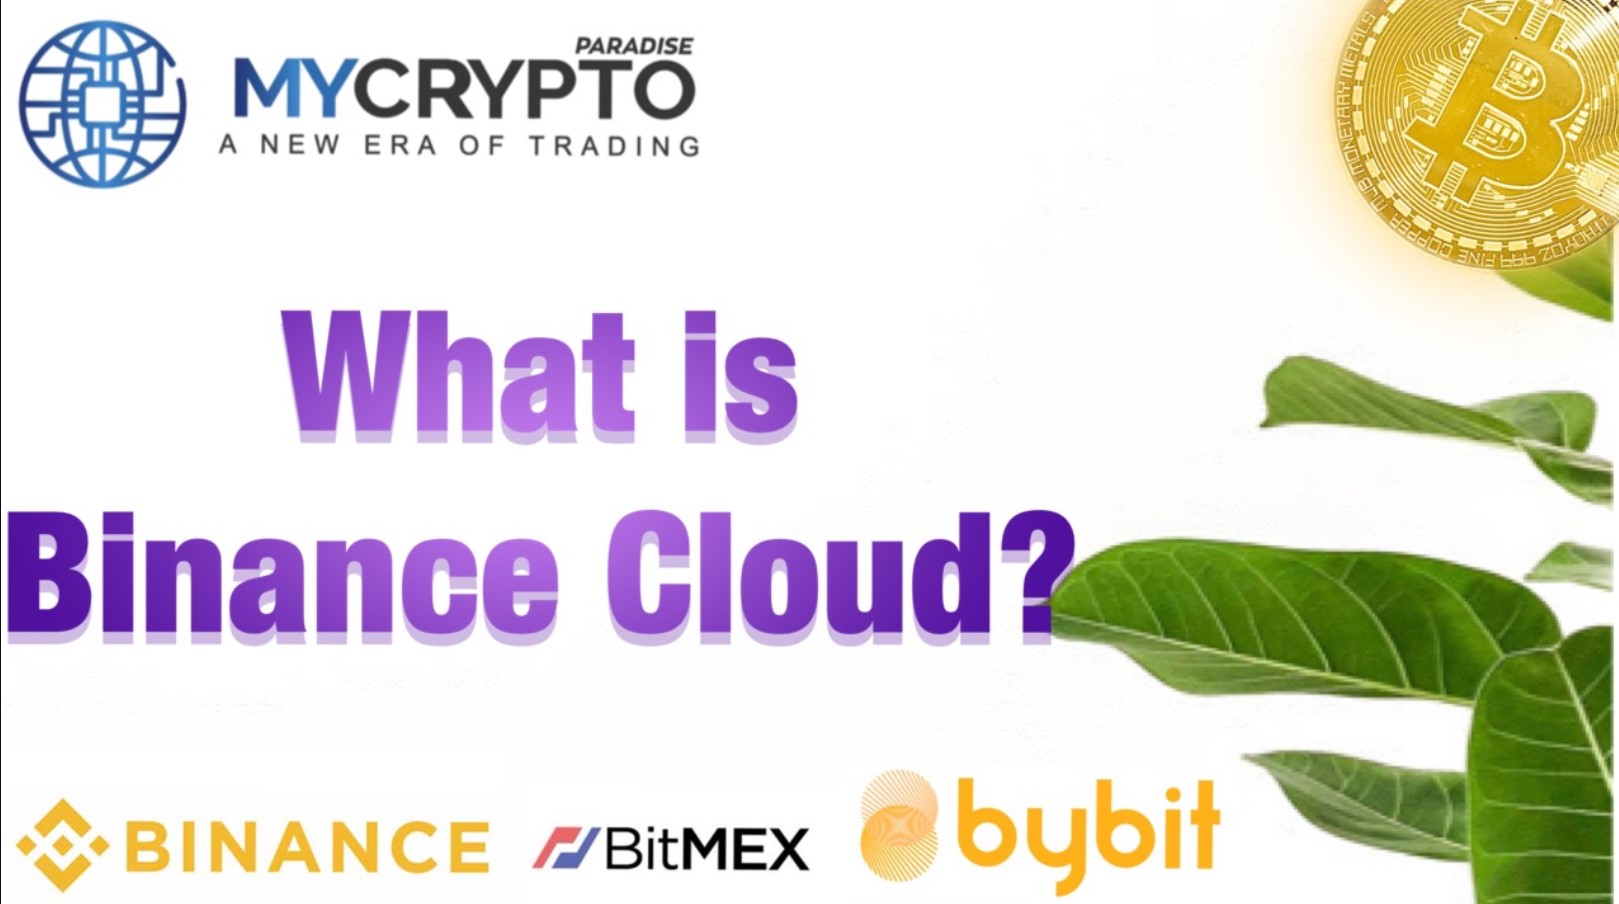 What is Binance Cloud? What are the benefits of using it?